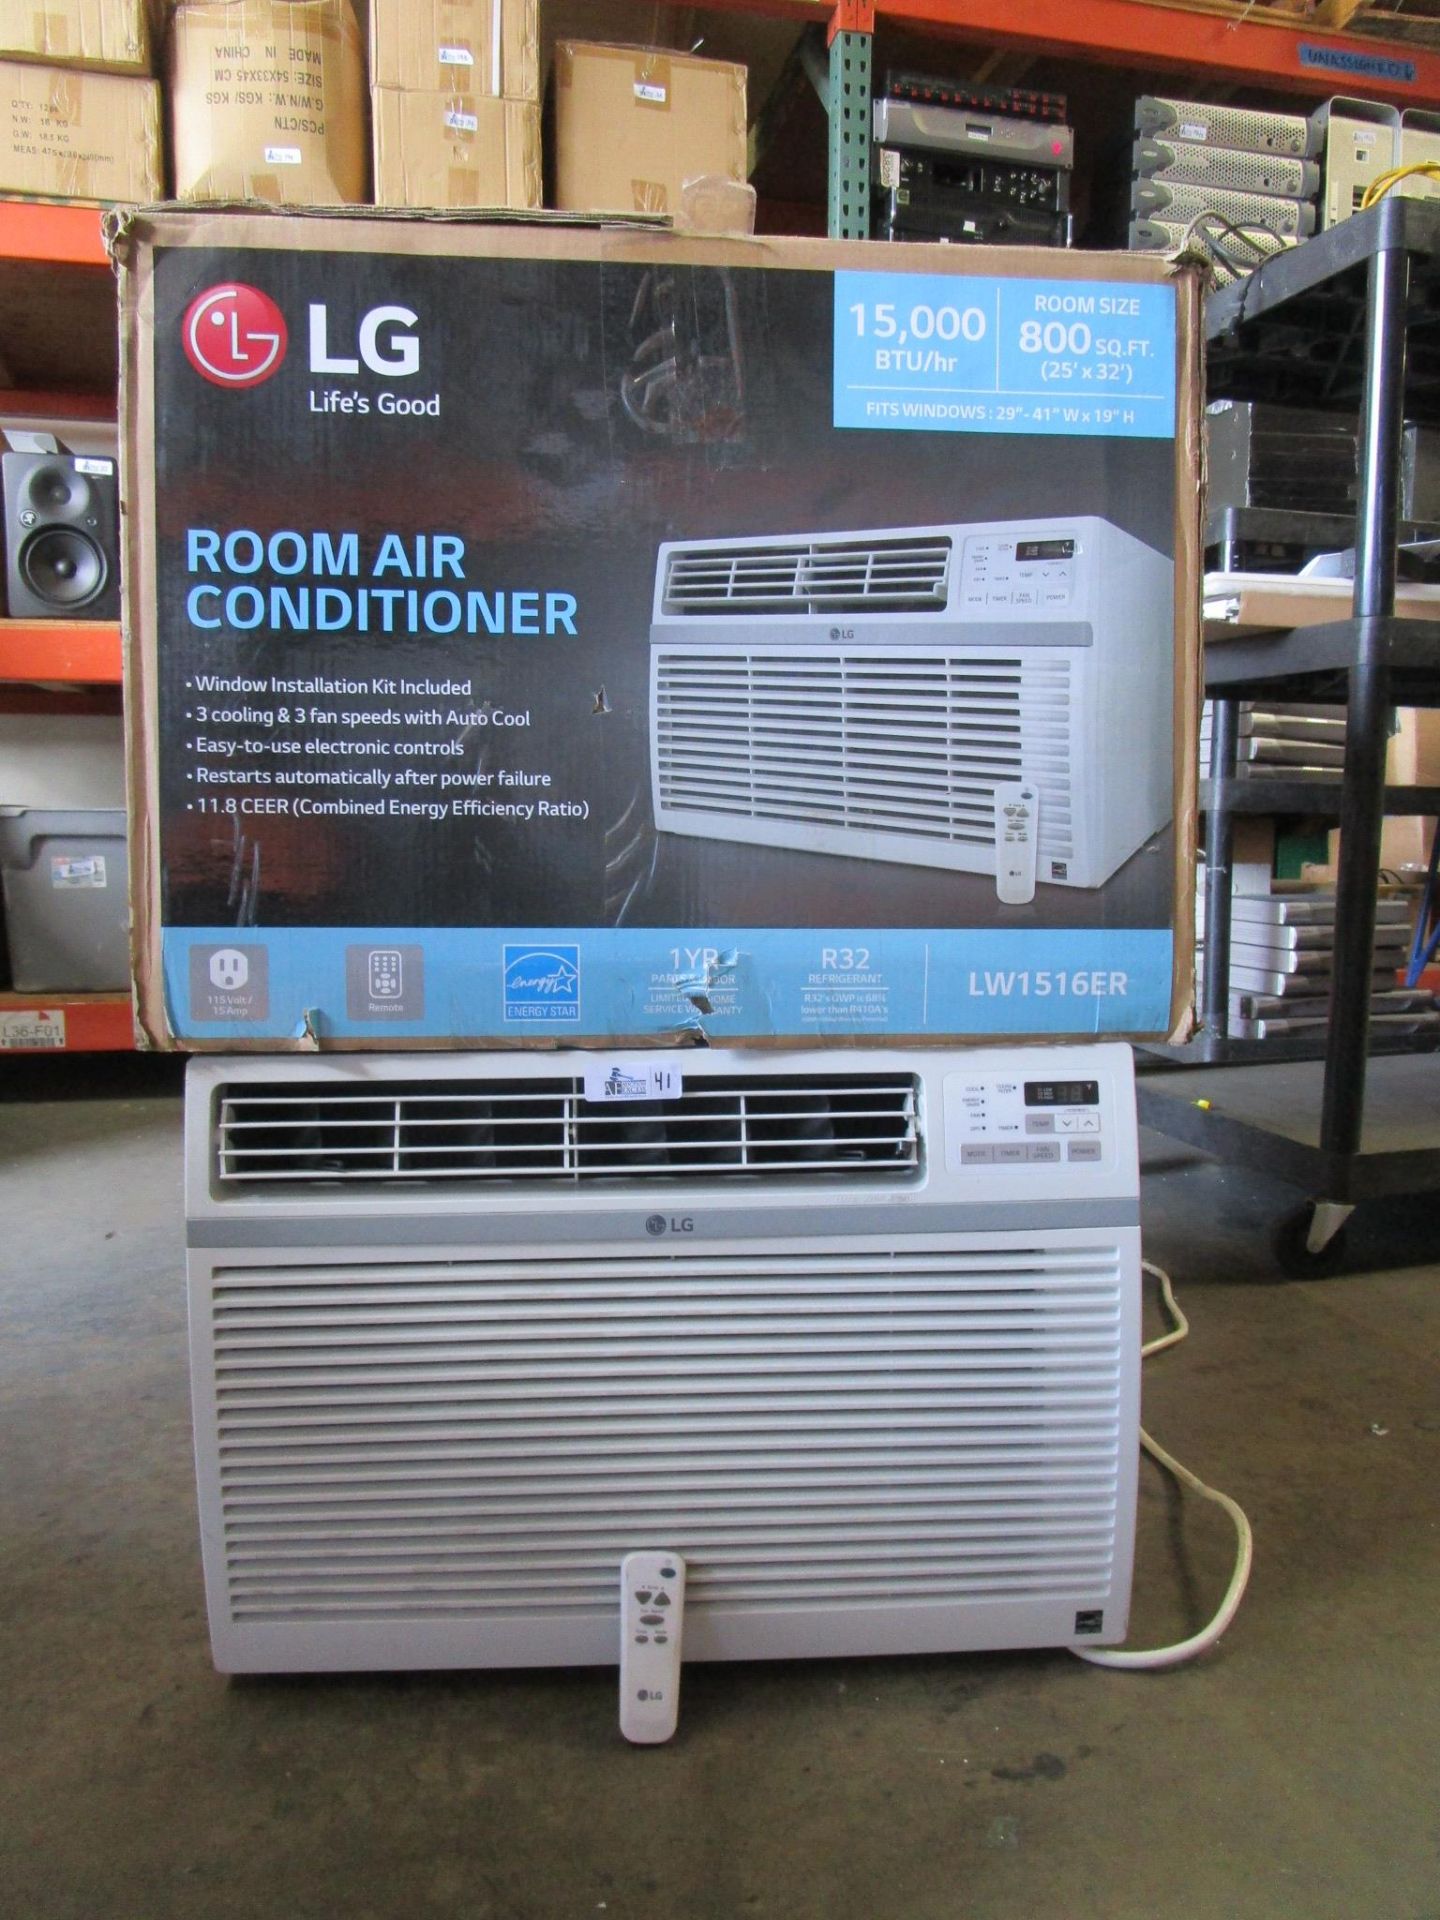 LG LW1516ER ROOM AIR CONDITIONER - Image 2 of 4